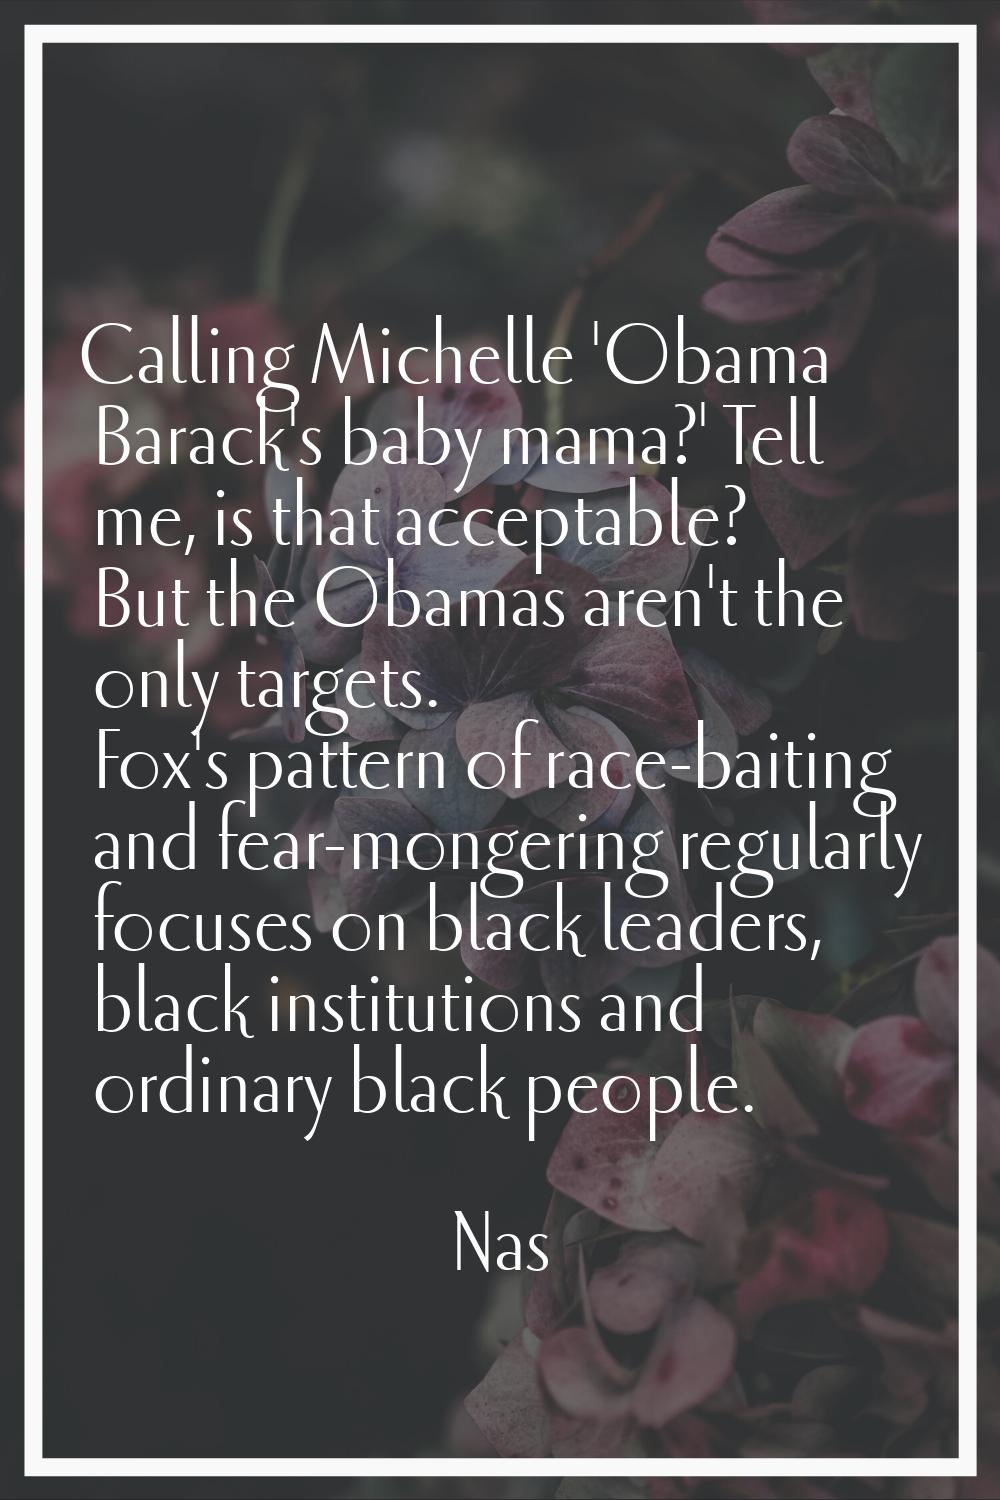 Calling Michelle 'Obama Barack's baby mama?' Tell me, is that acceptable? But the Obamas aren't the